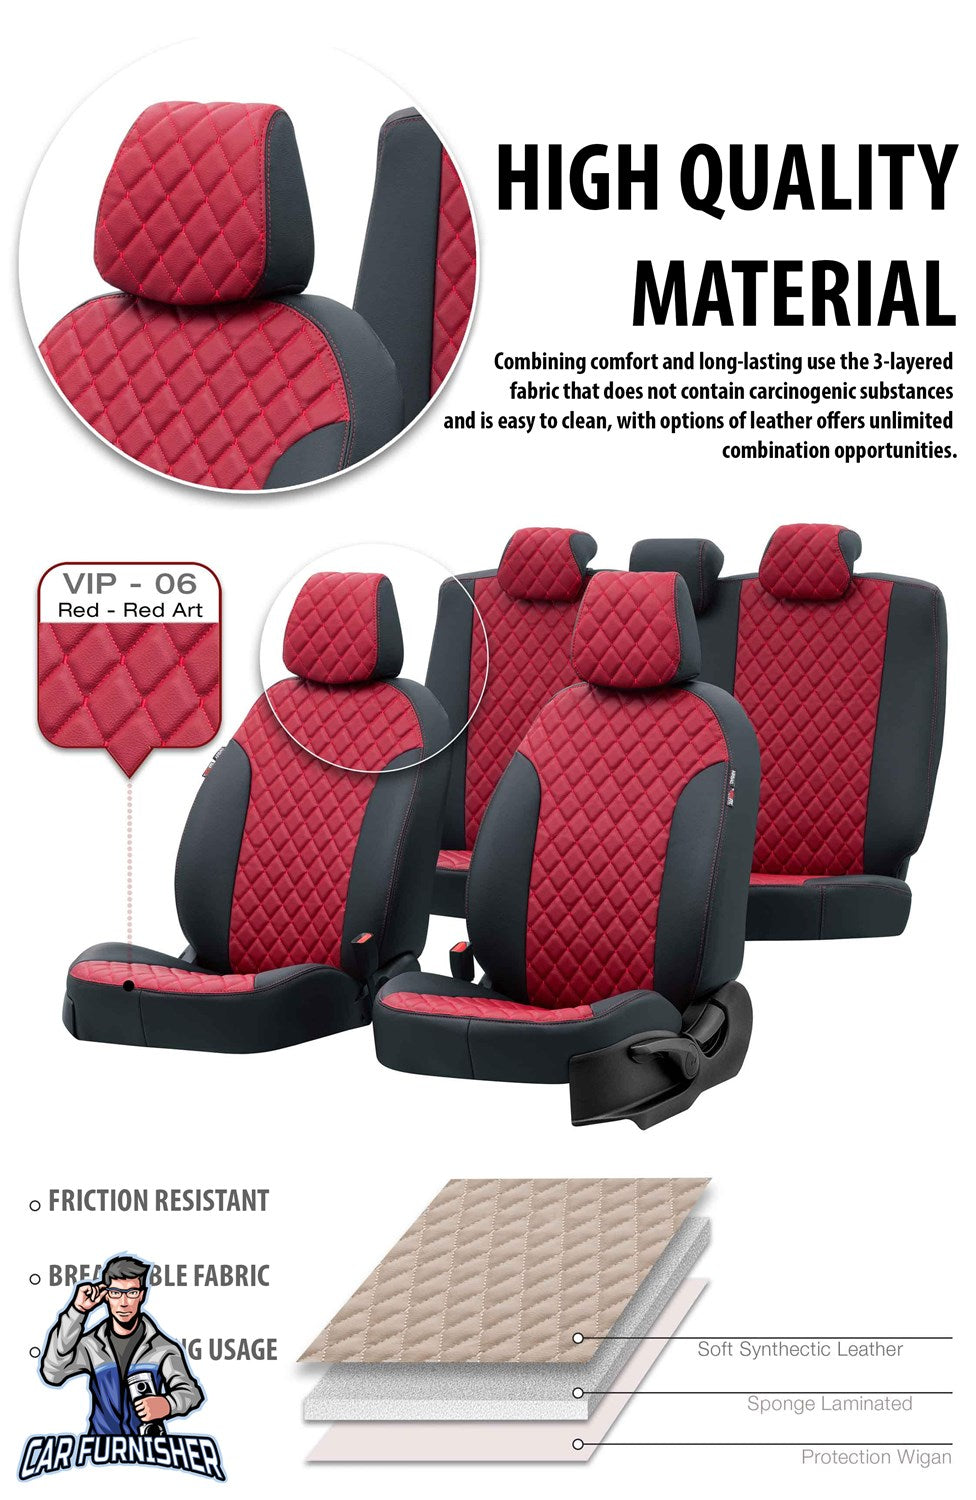 Renault Talisman Seat Covers Madrid Leather Design Dark Red Leather